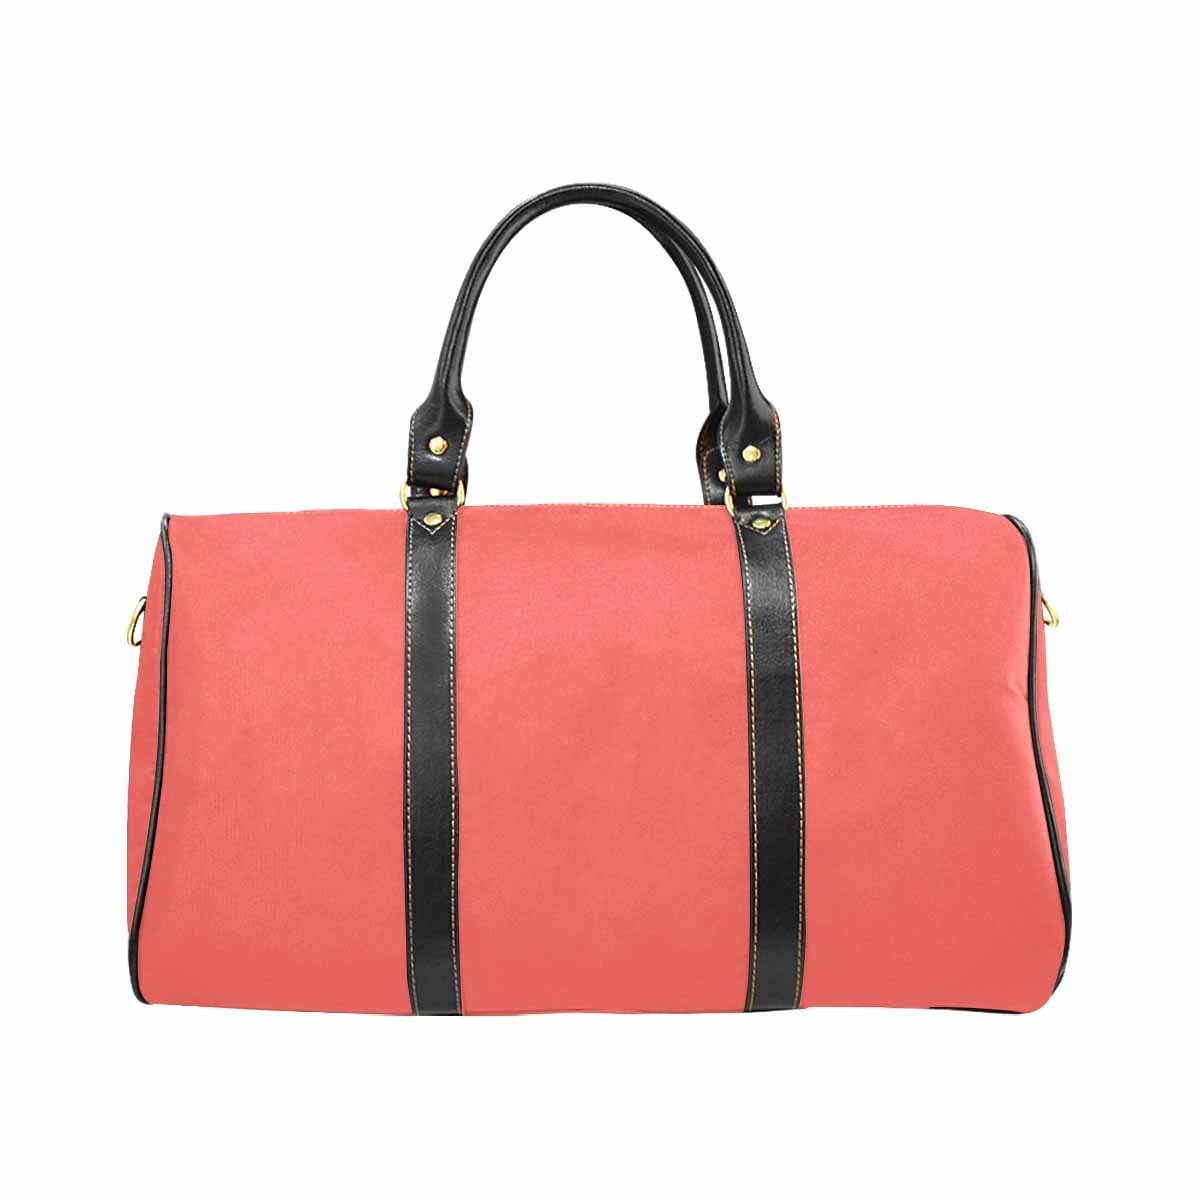 Pastel Red Travel Bag Carry On Luggage Adjustable Strap Black - Bags | Travel